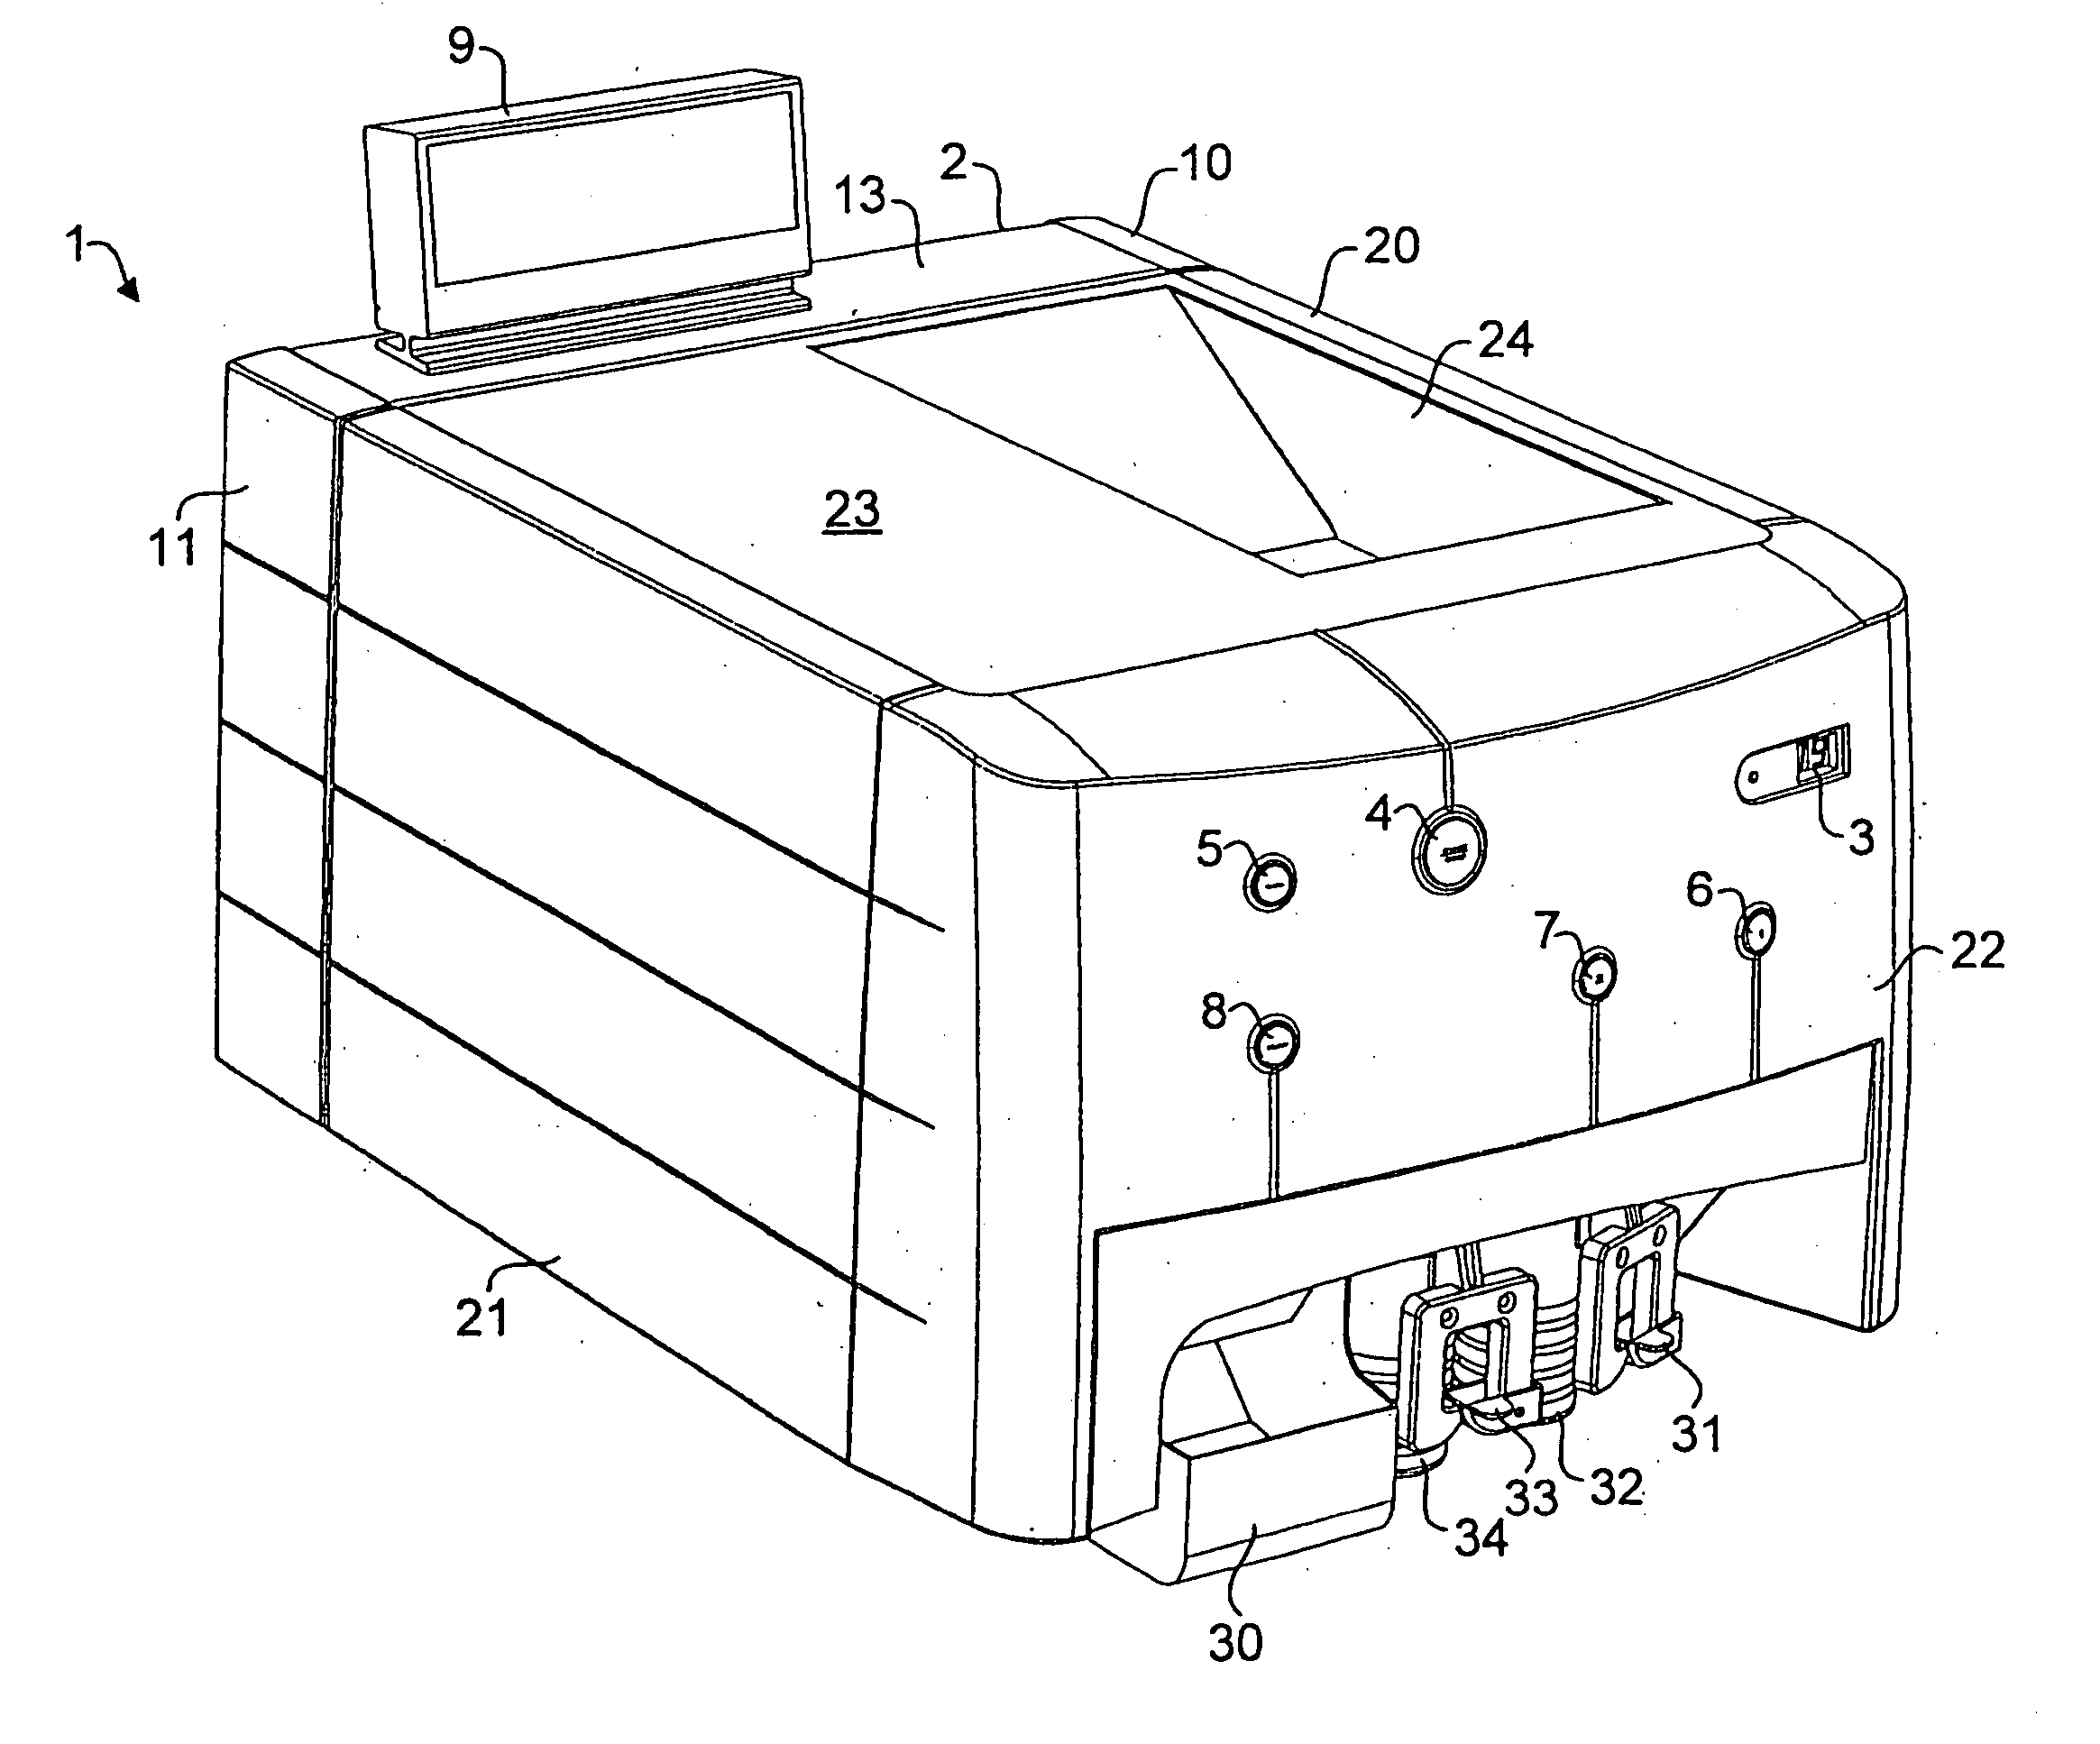 Coin handling apparatus with means for deflecting non-separated valid coins